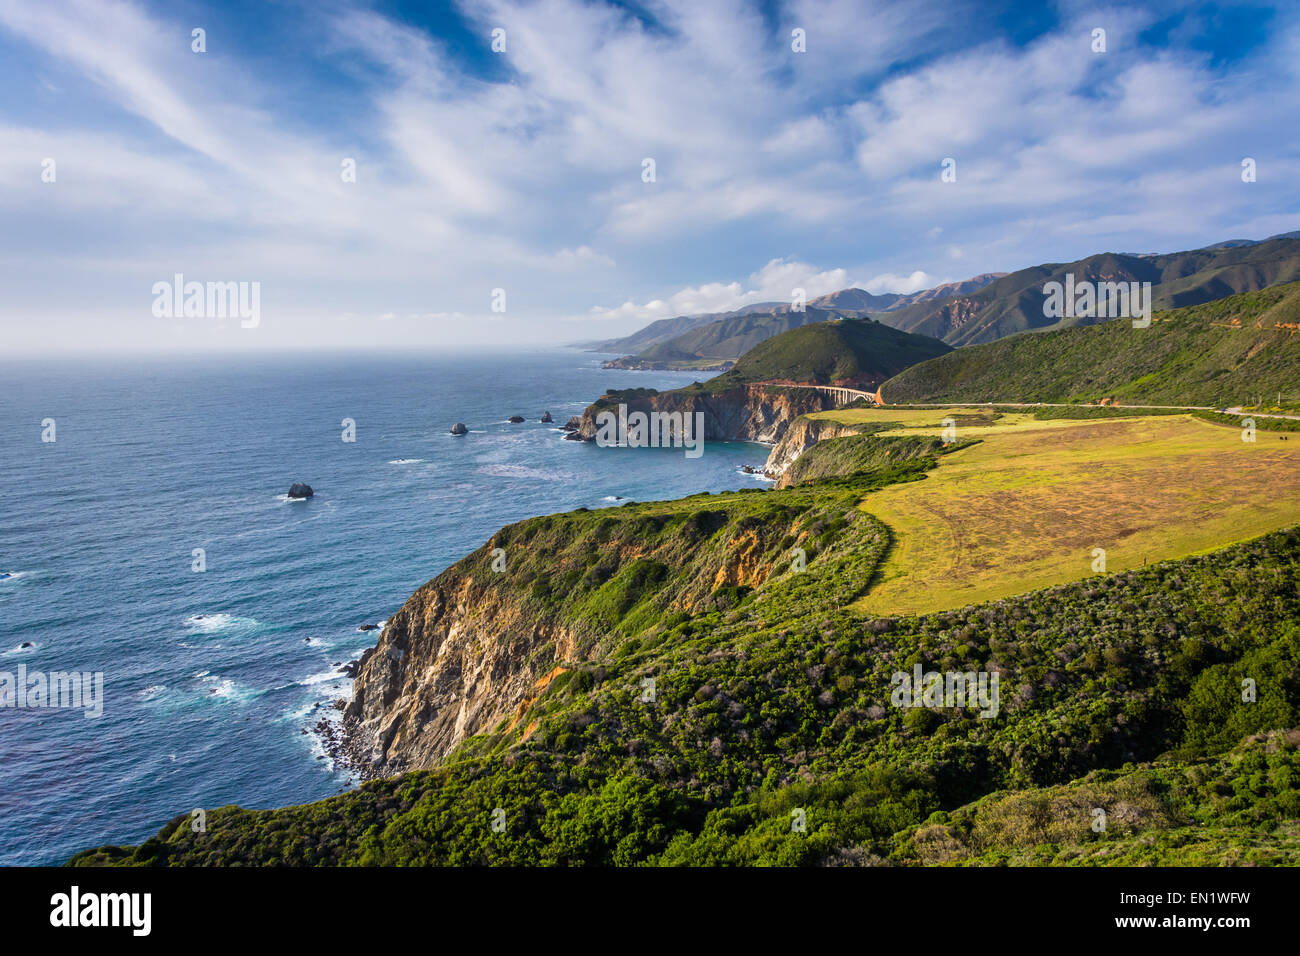 View of mountains along the Pacific Coast, in Big Sur, California. Stock Photo